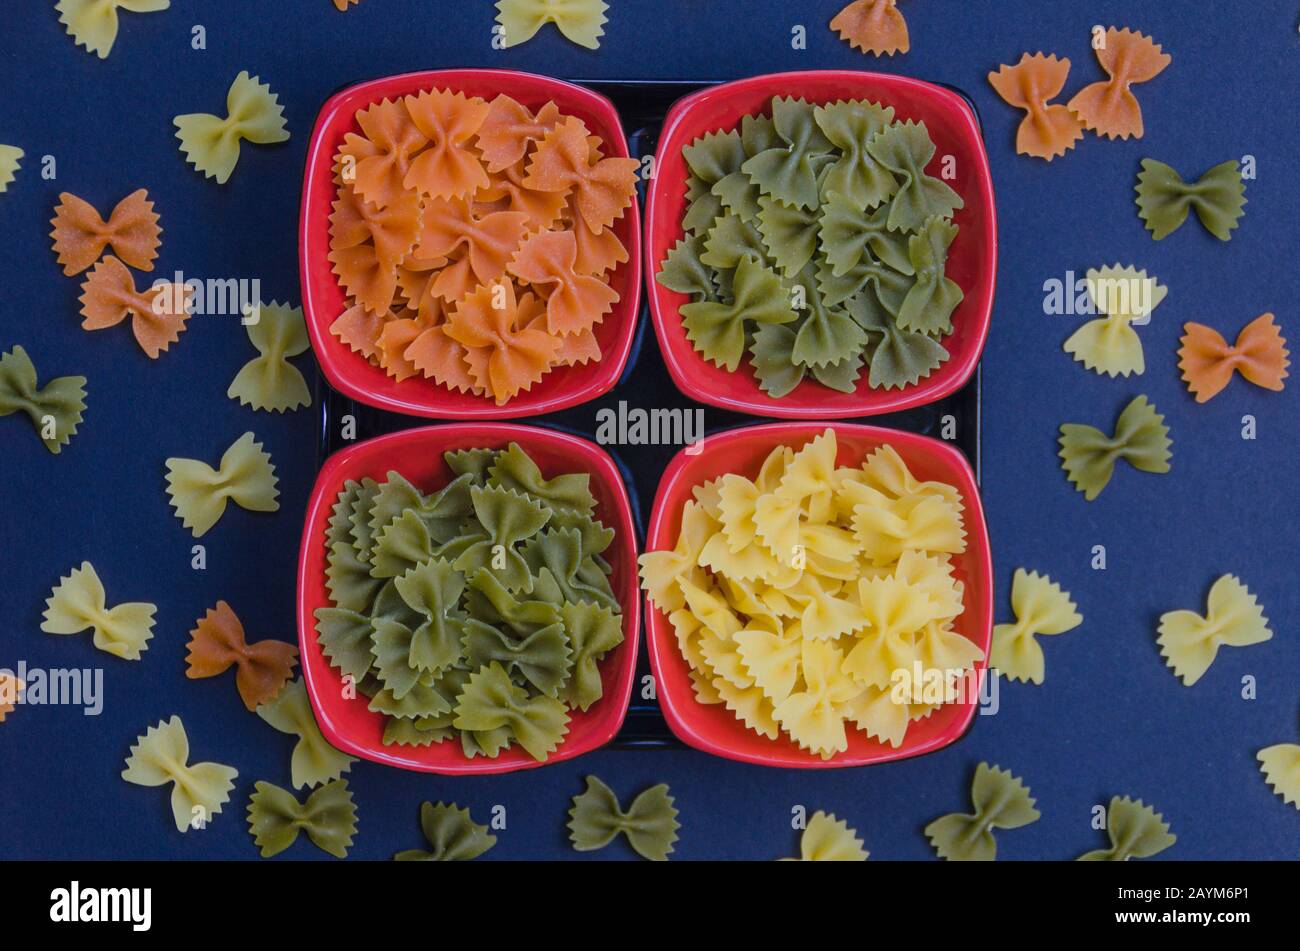 Four bowls filled with italian pasta on a blue background Stock Photo